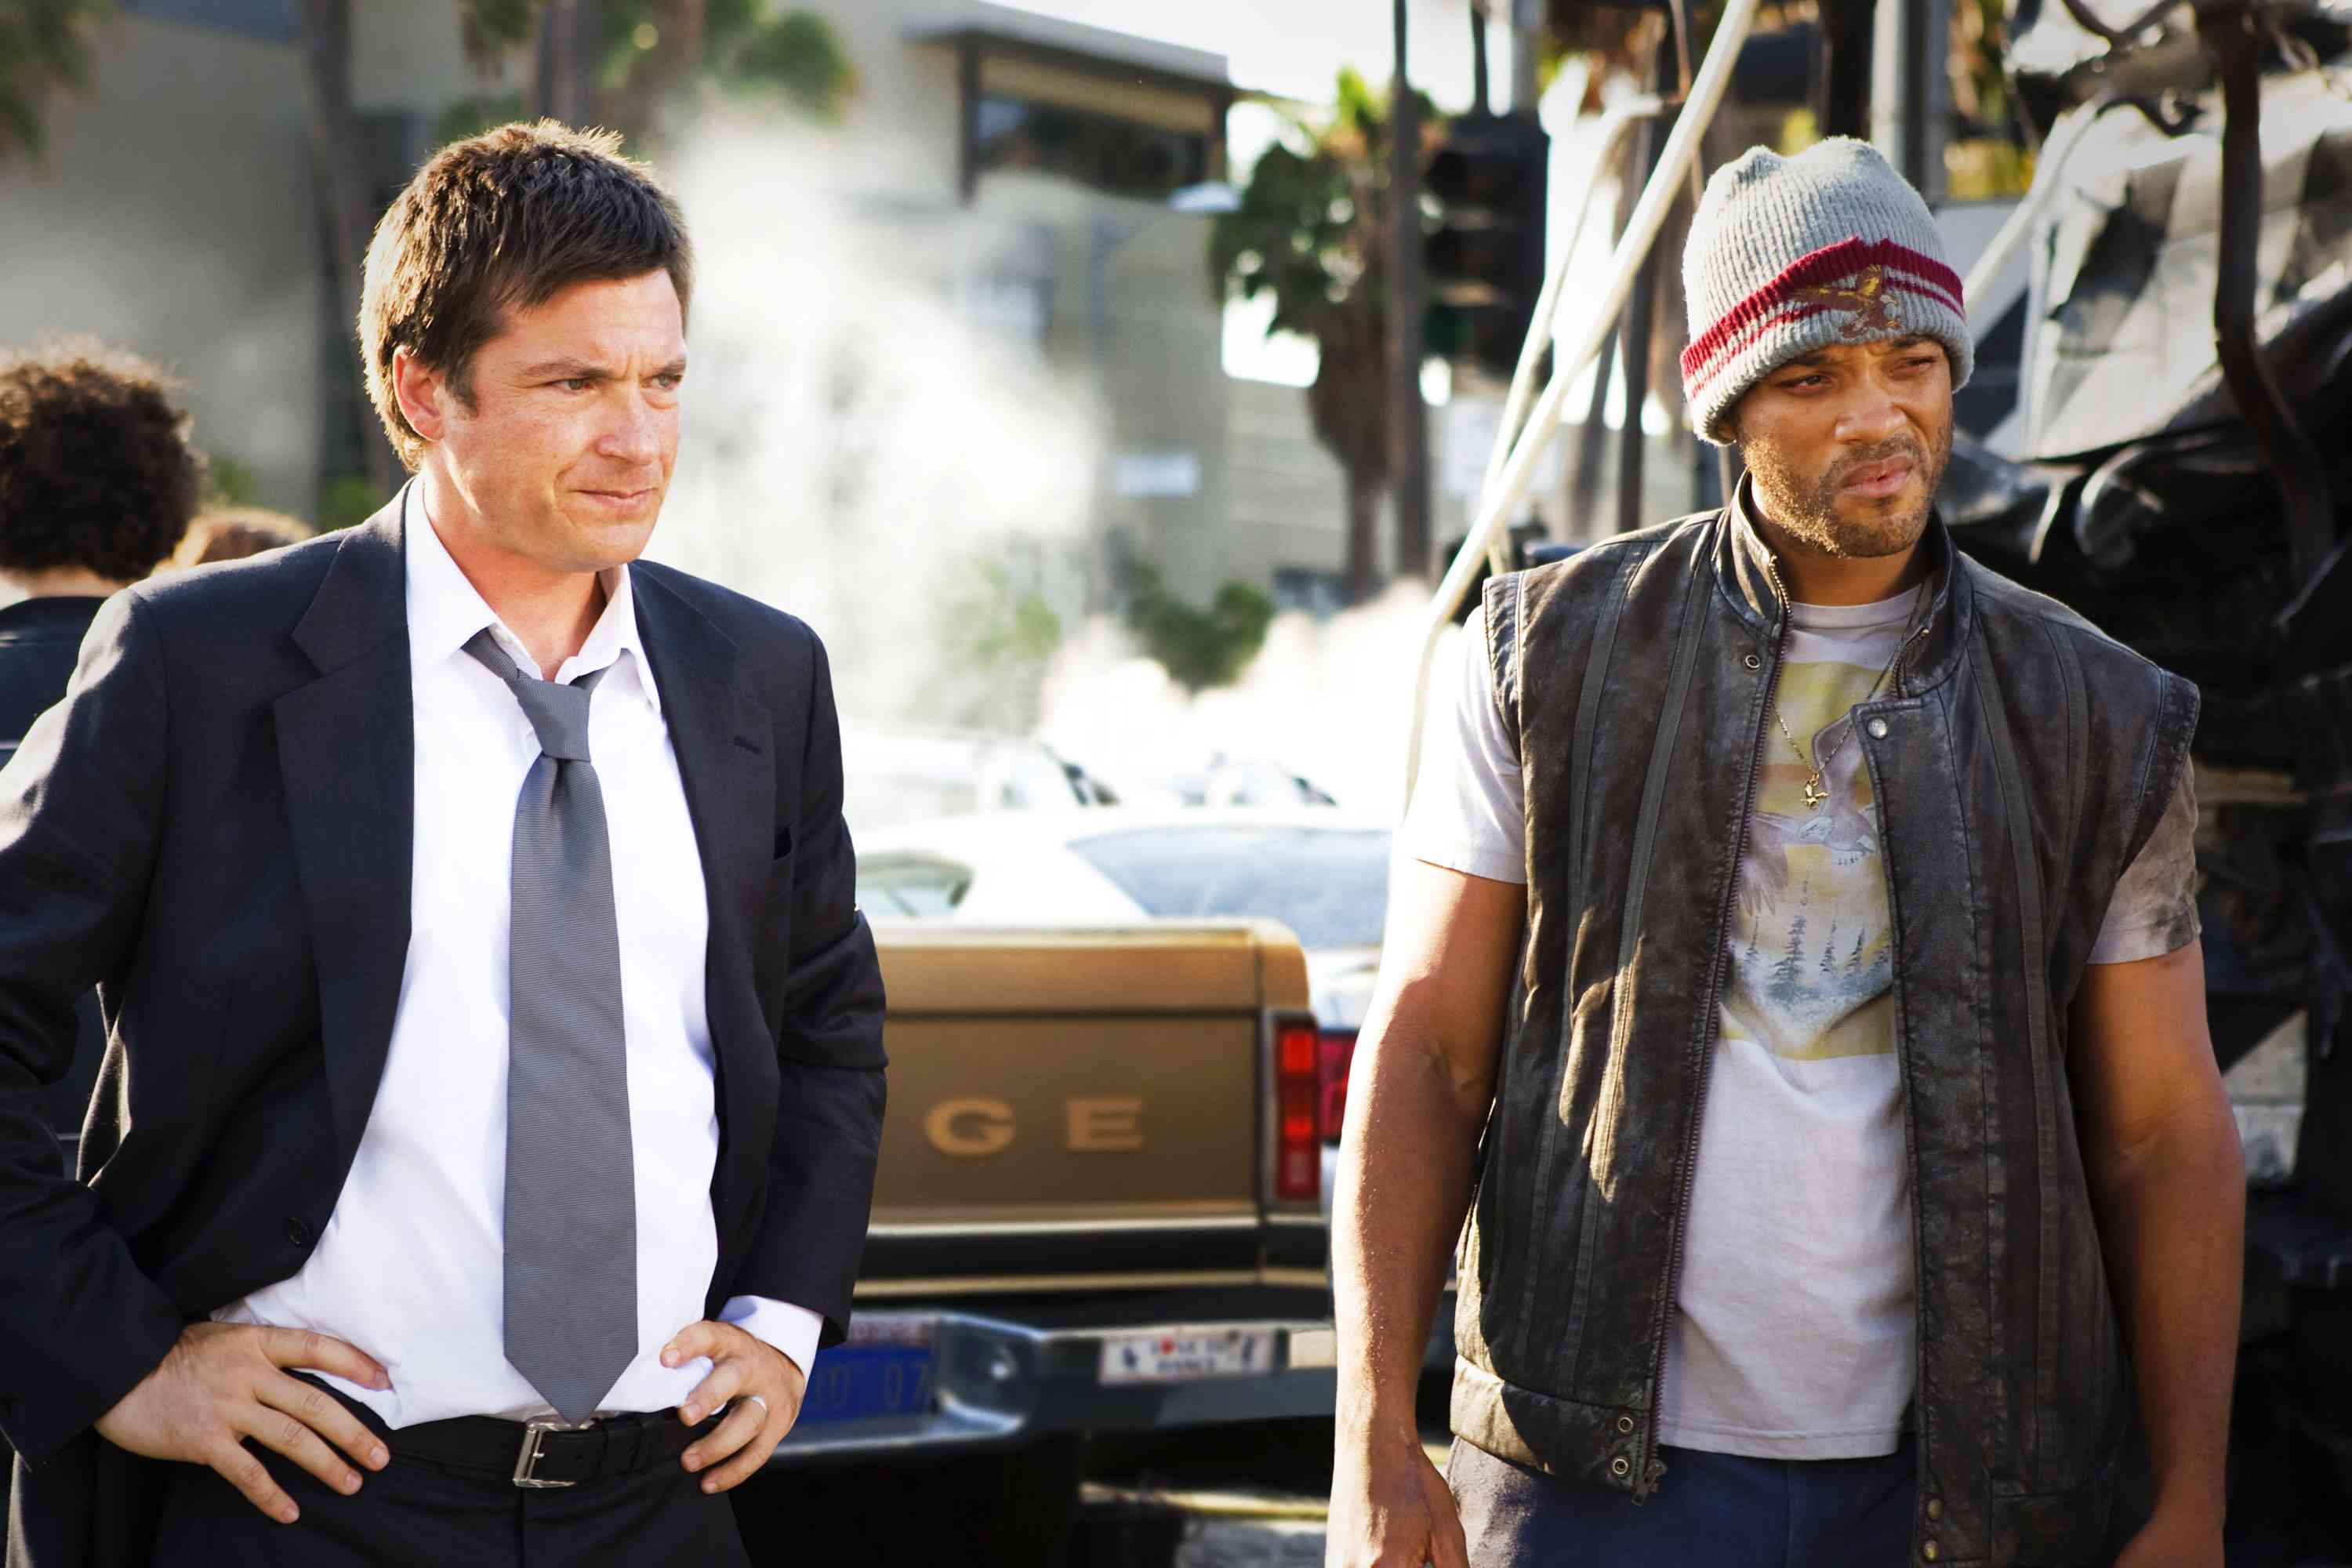 When disgruntled superhero Hancock (Will Smith, left) saves the life of PR exec Ray Embrey (Jason Bateman, right), Ray tries to clean up Hancock. Photo credit: Frank Masi SMPSP.